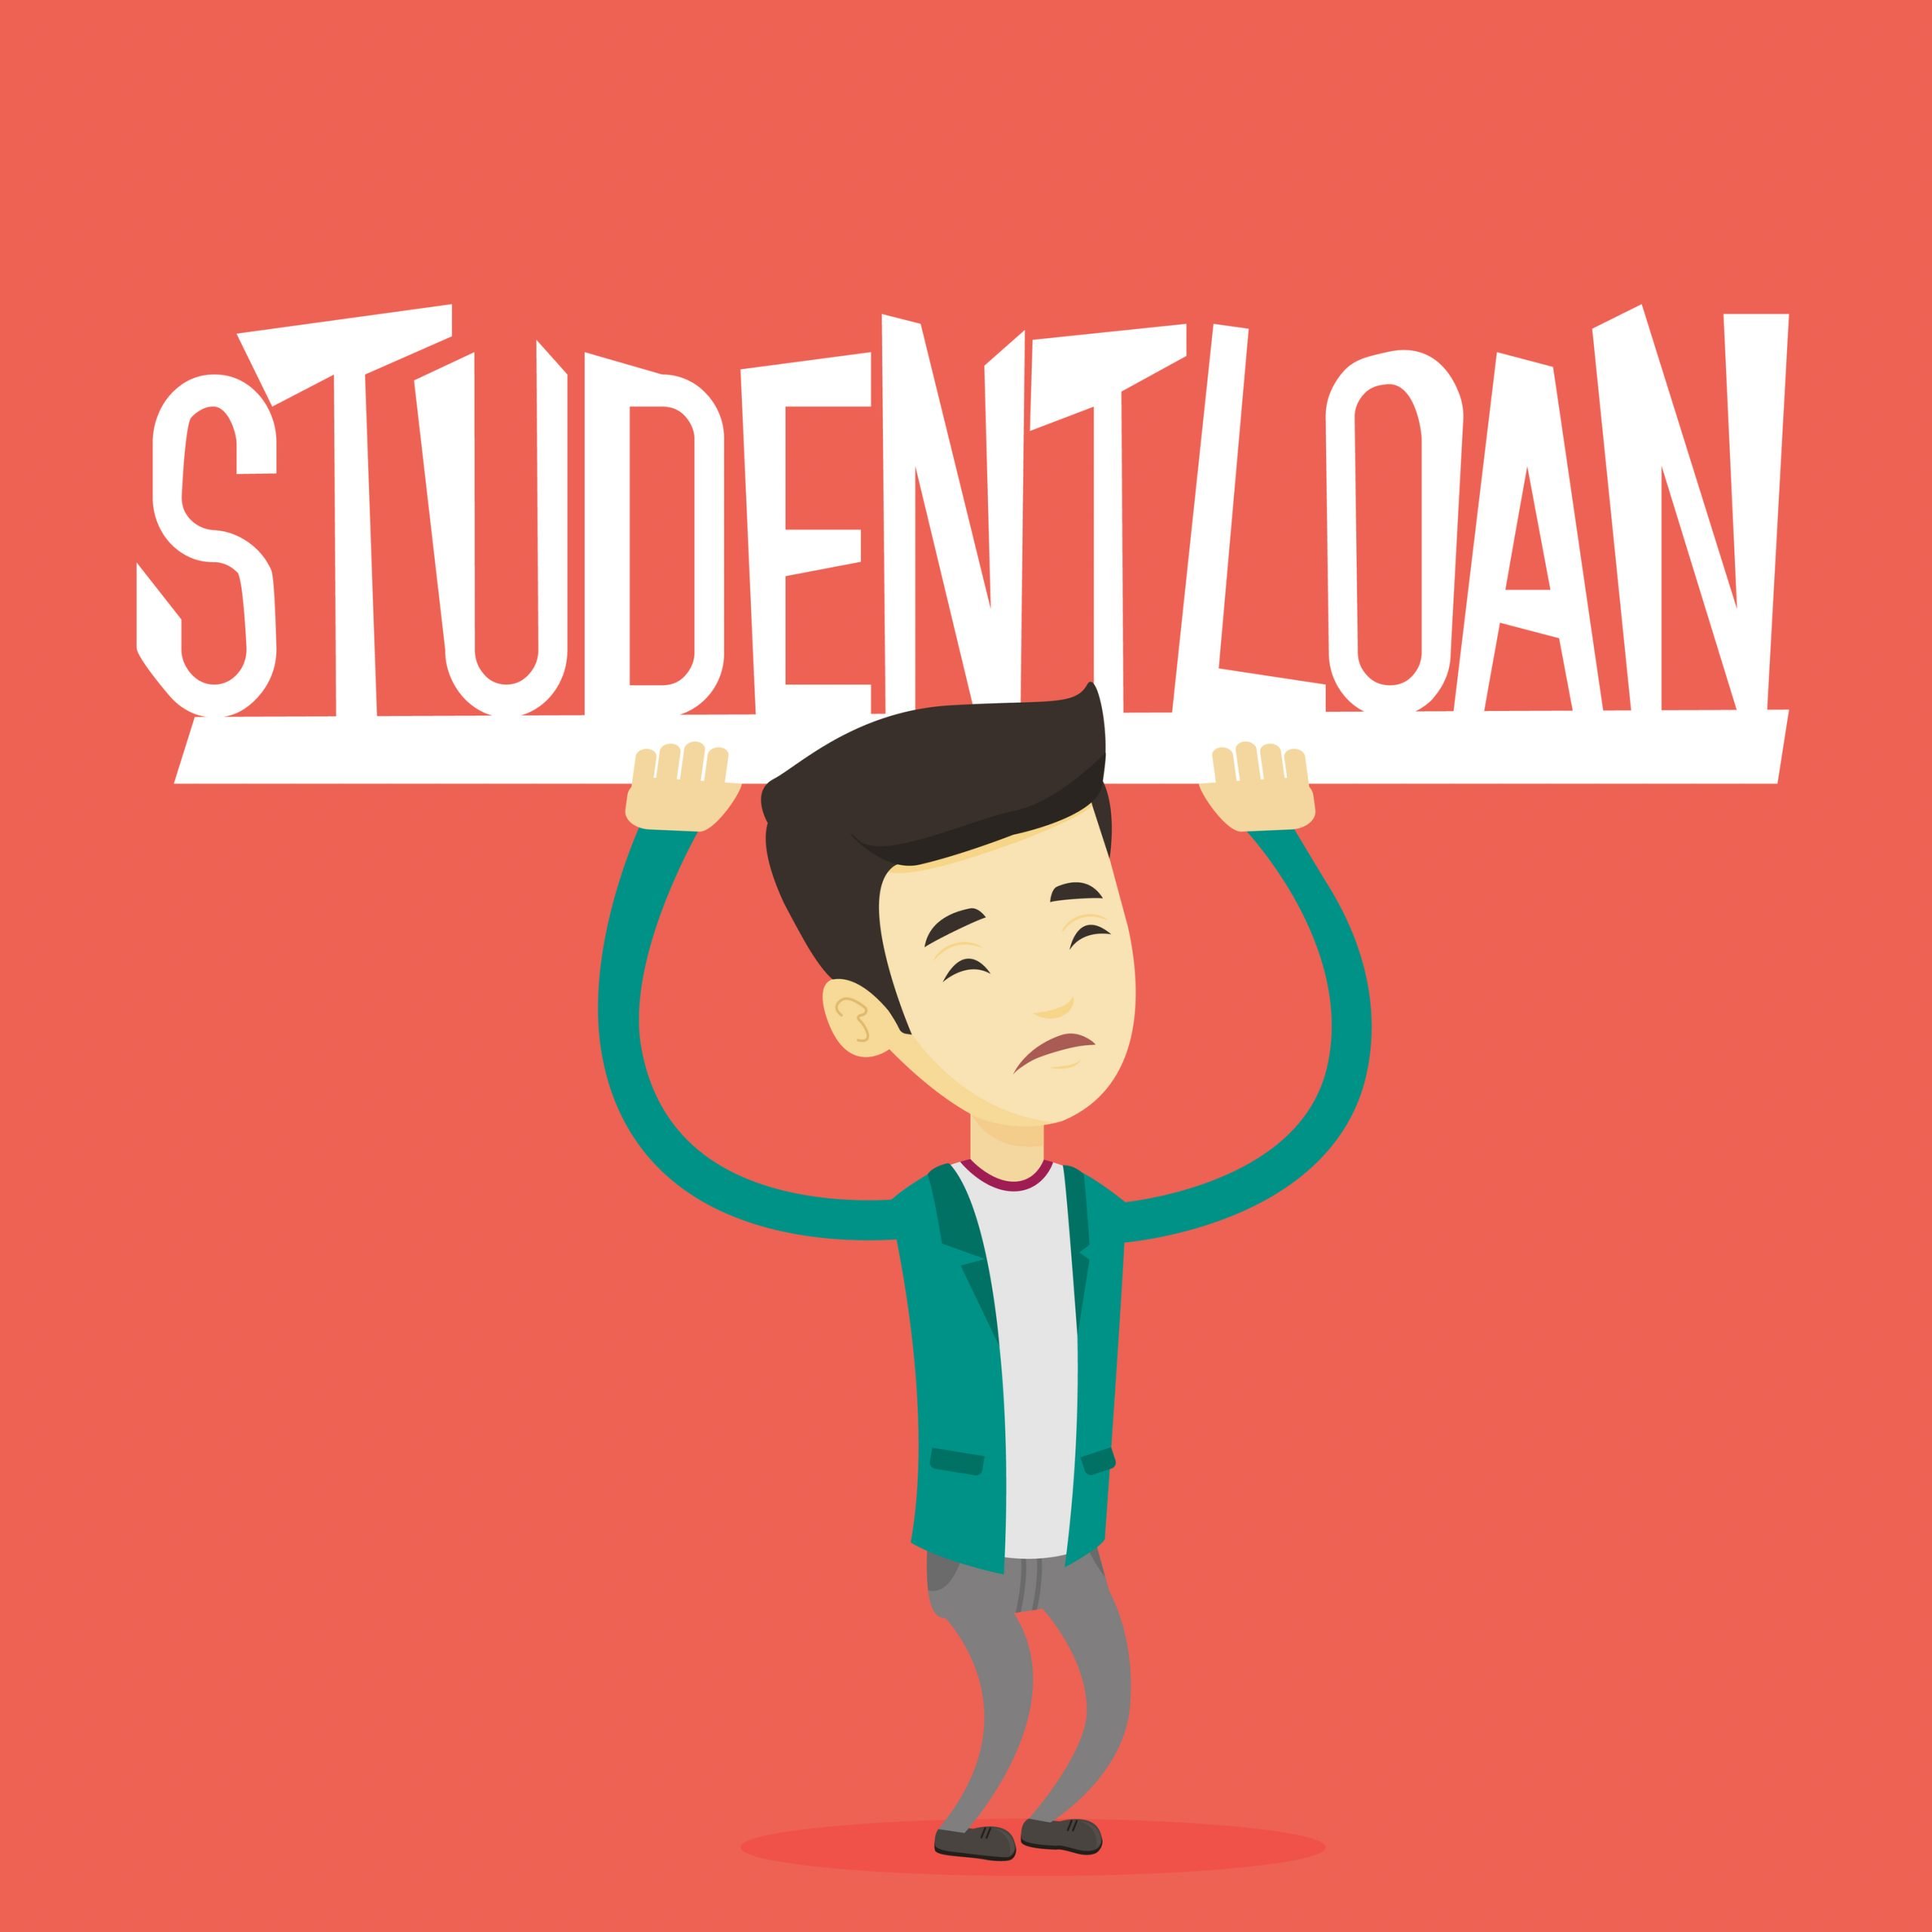 401k Student Loan Repayment Programs Give Retirement Readiness